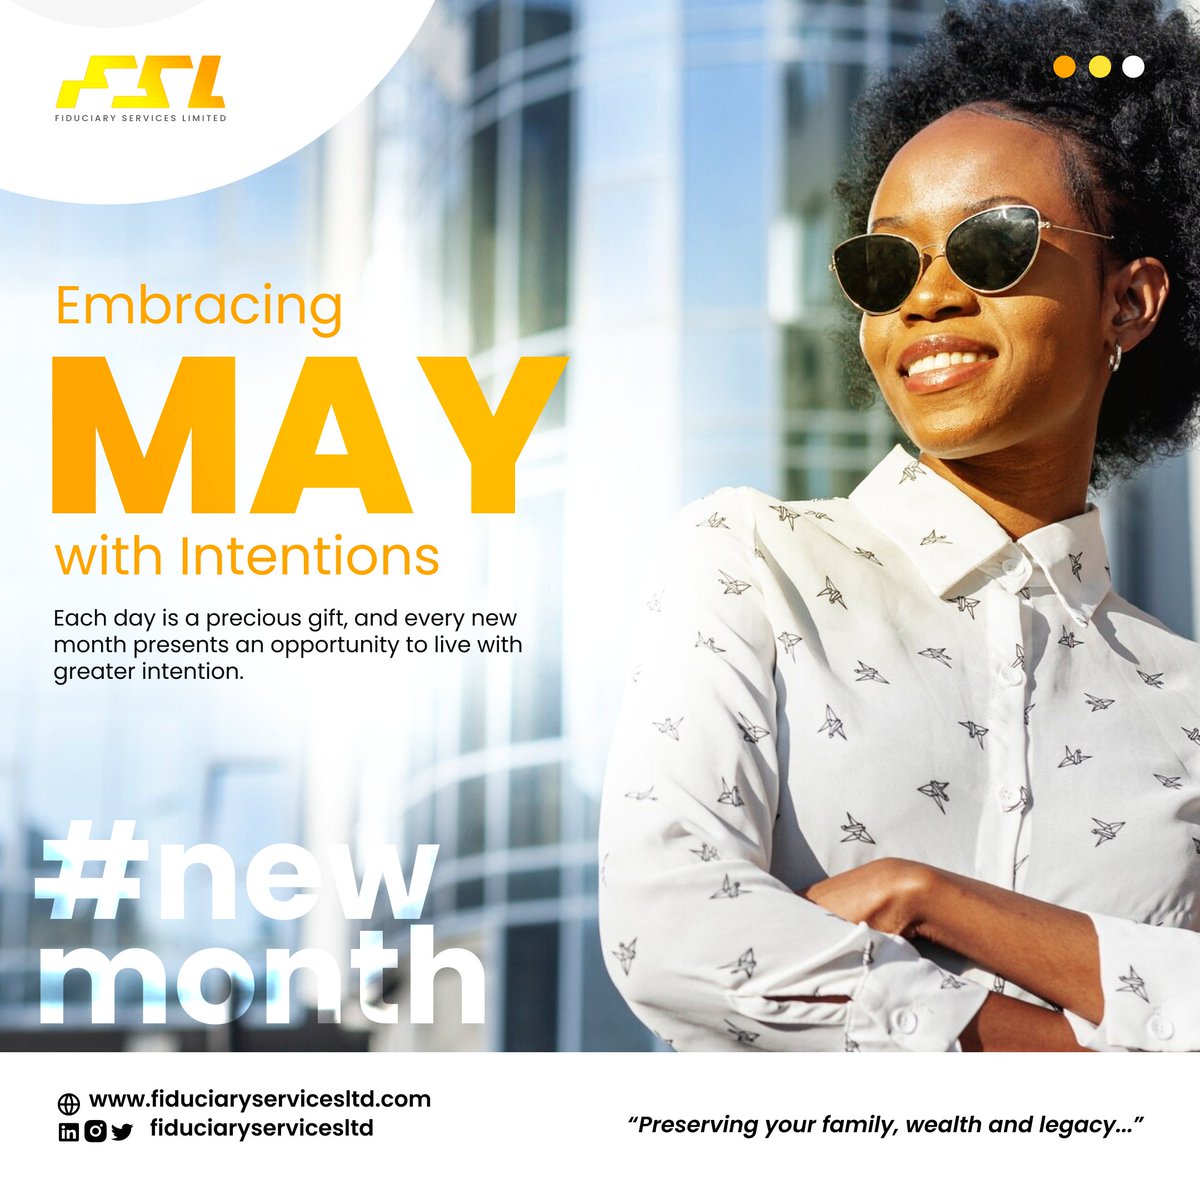 As we enter May, let's make a conscious effort to align our actions with our values and priorities.

#Newmonth #IntentionalLiving #Values #Priorities #Purpose #Authenticity